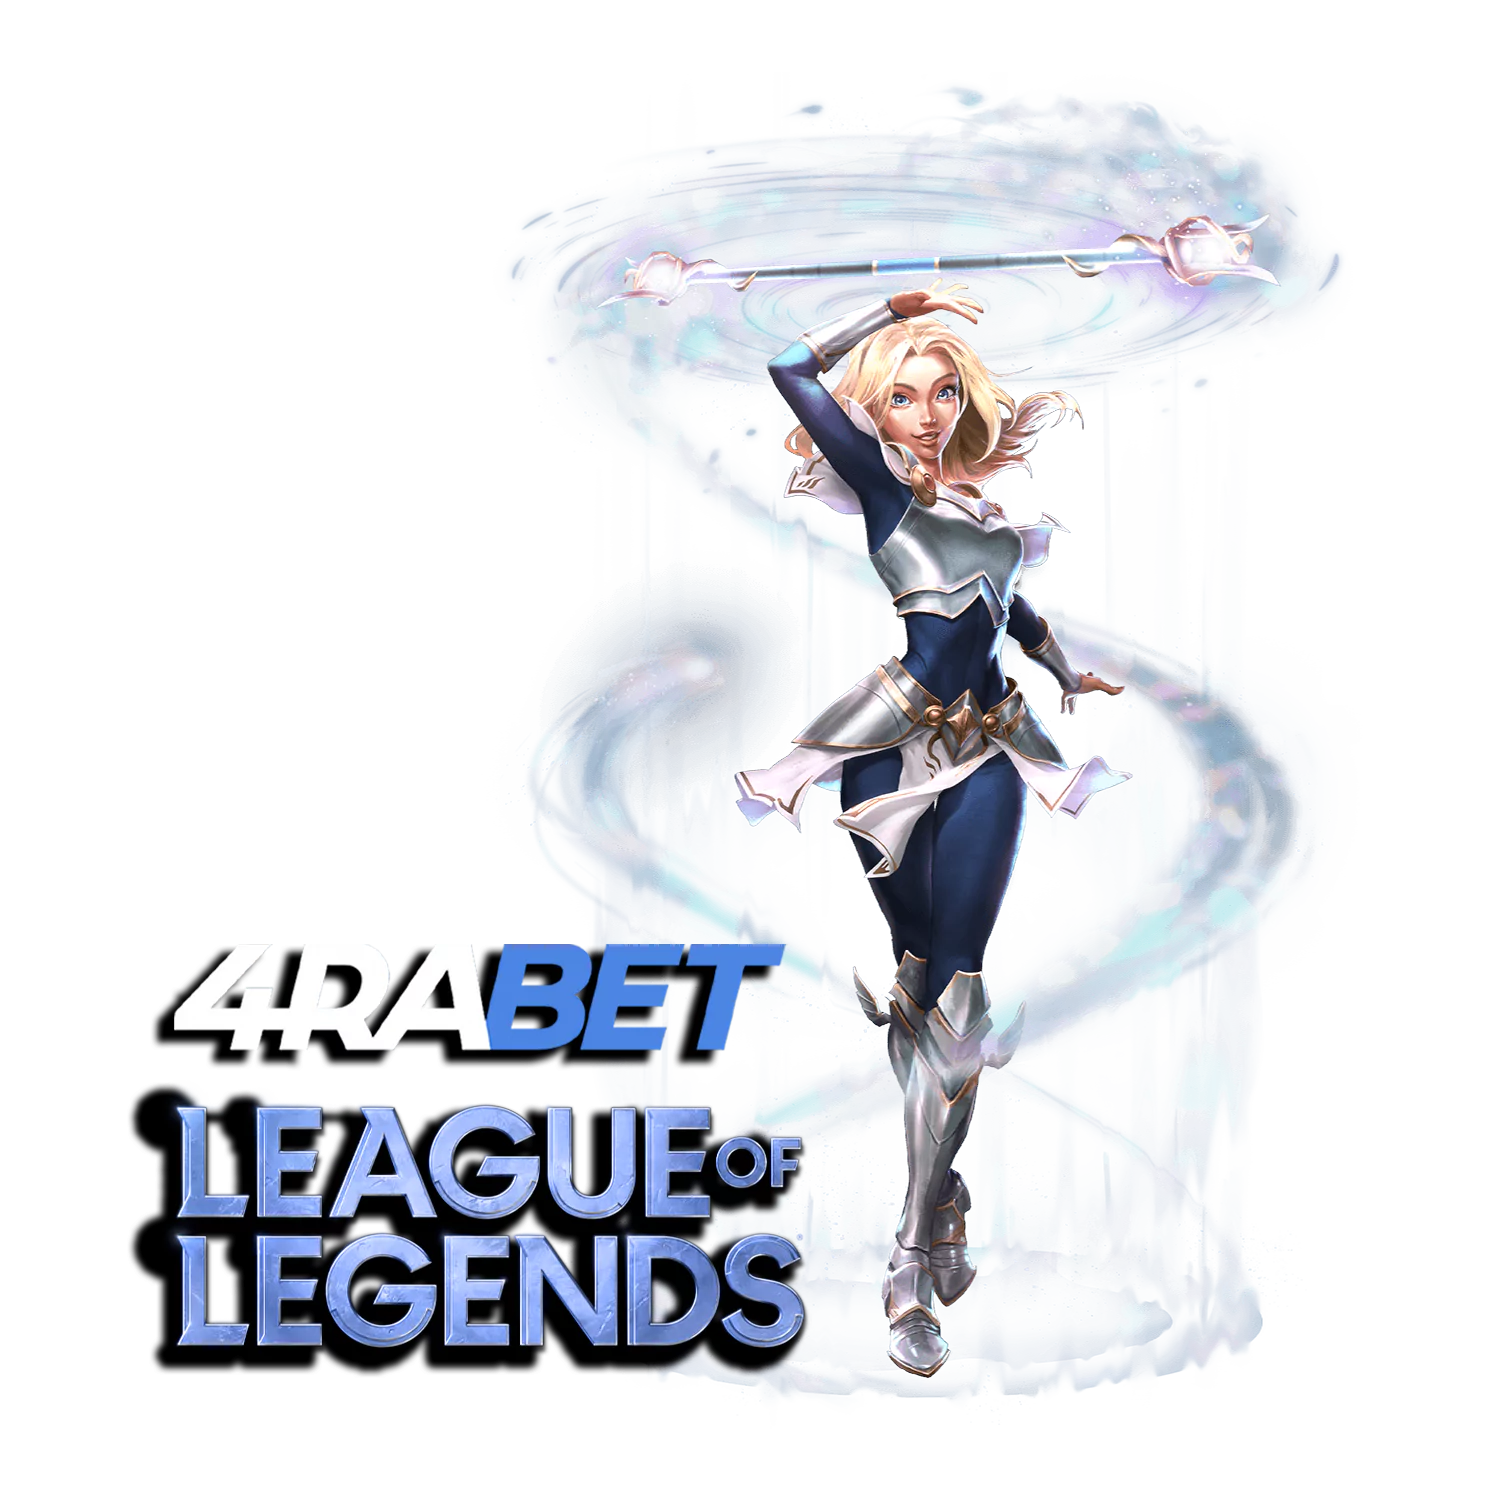 Learn how to bet on the League of Legends matches at 4rabet.